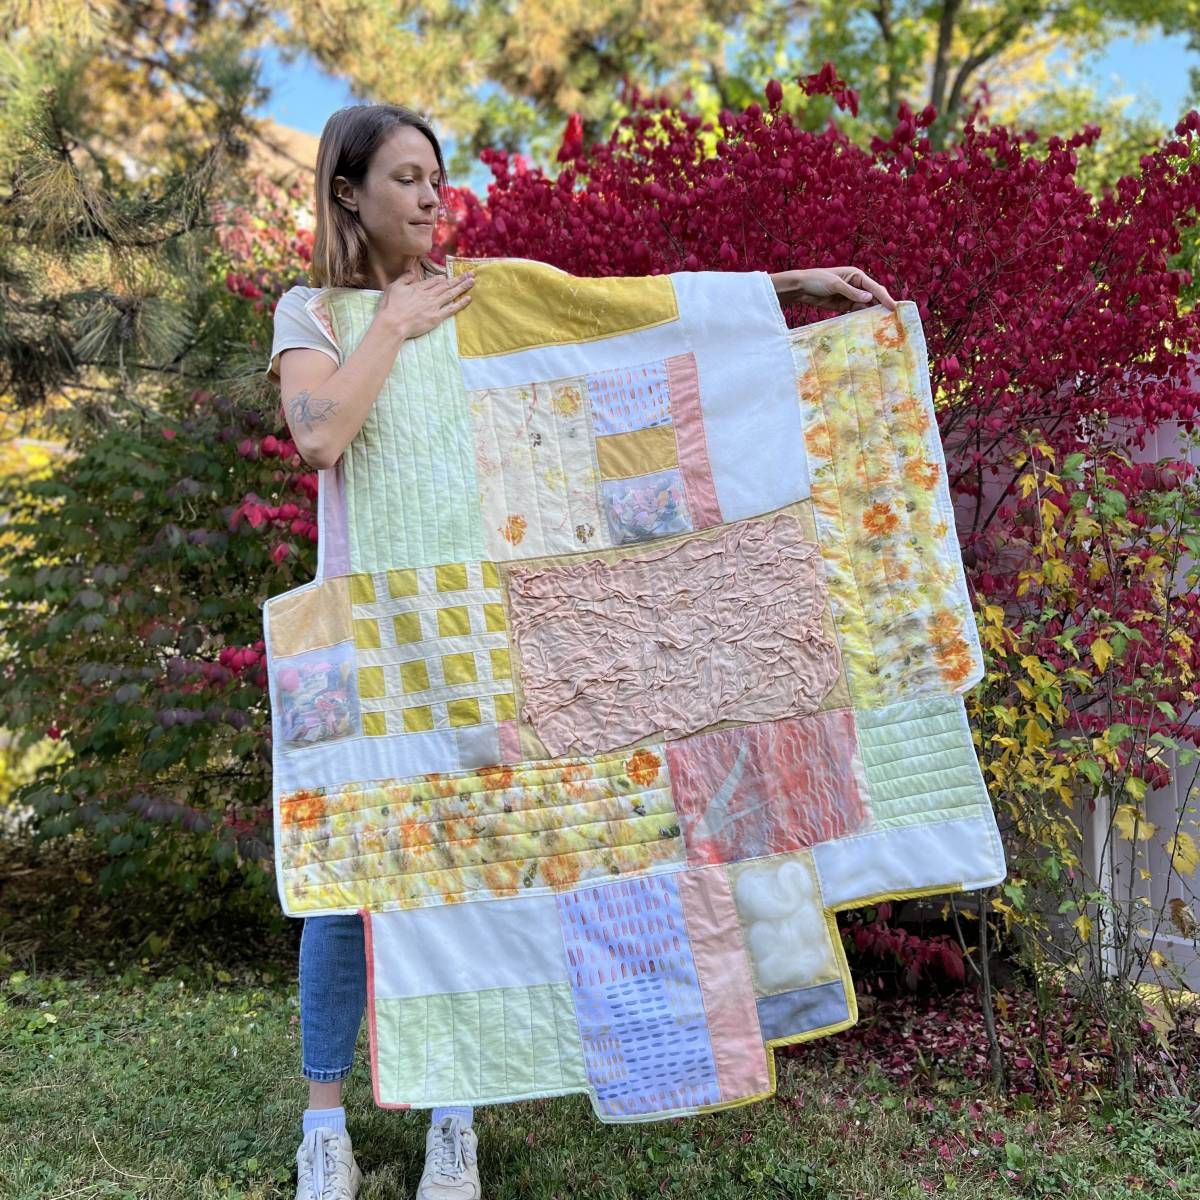 SUMMER CAMP - Creative Quilts: Exploring The Art + Craft of Quilting